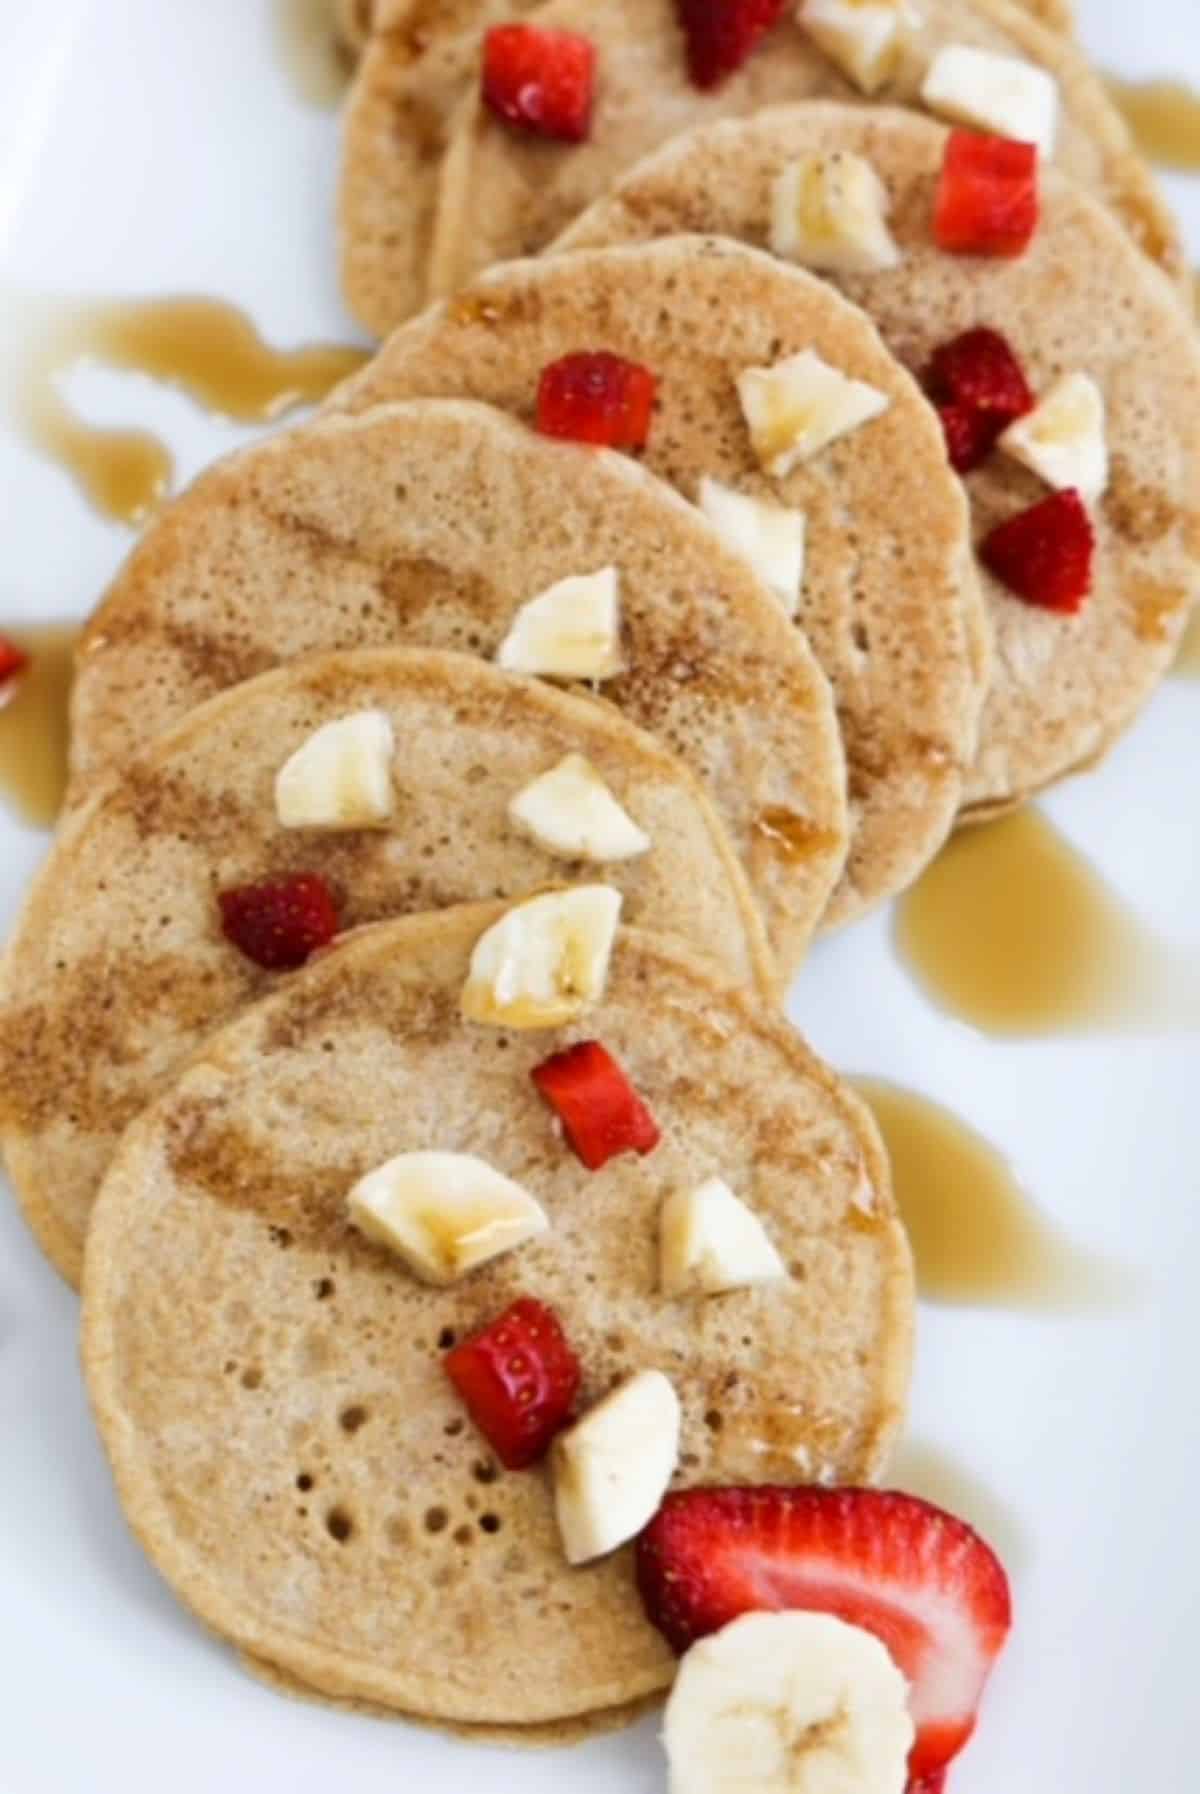 Several small pancakes overlapping, topped with pieces of banana and strawberry. Drizzled with maple syrup.